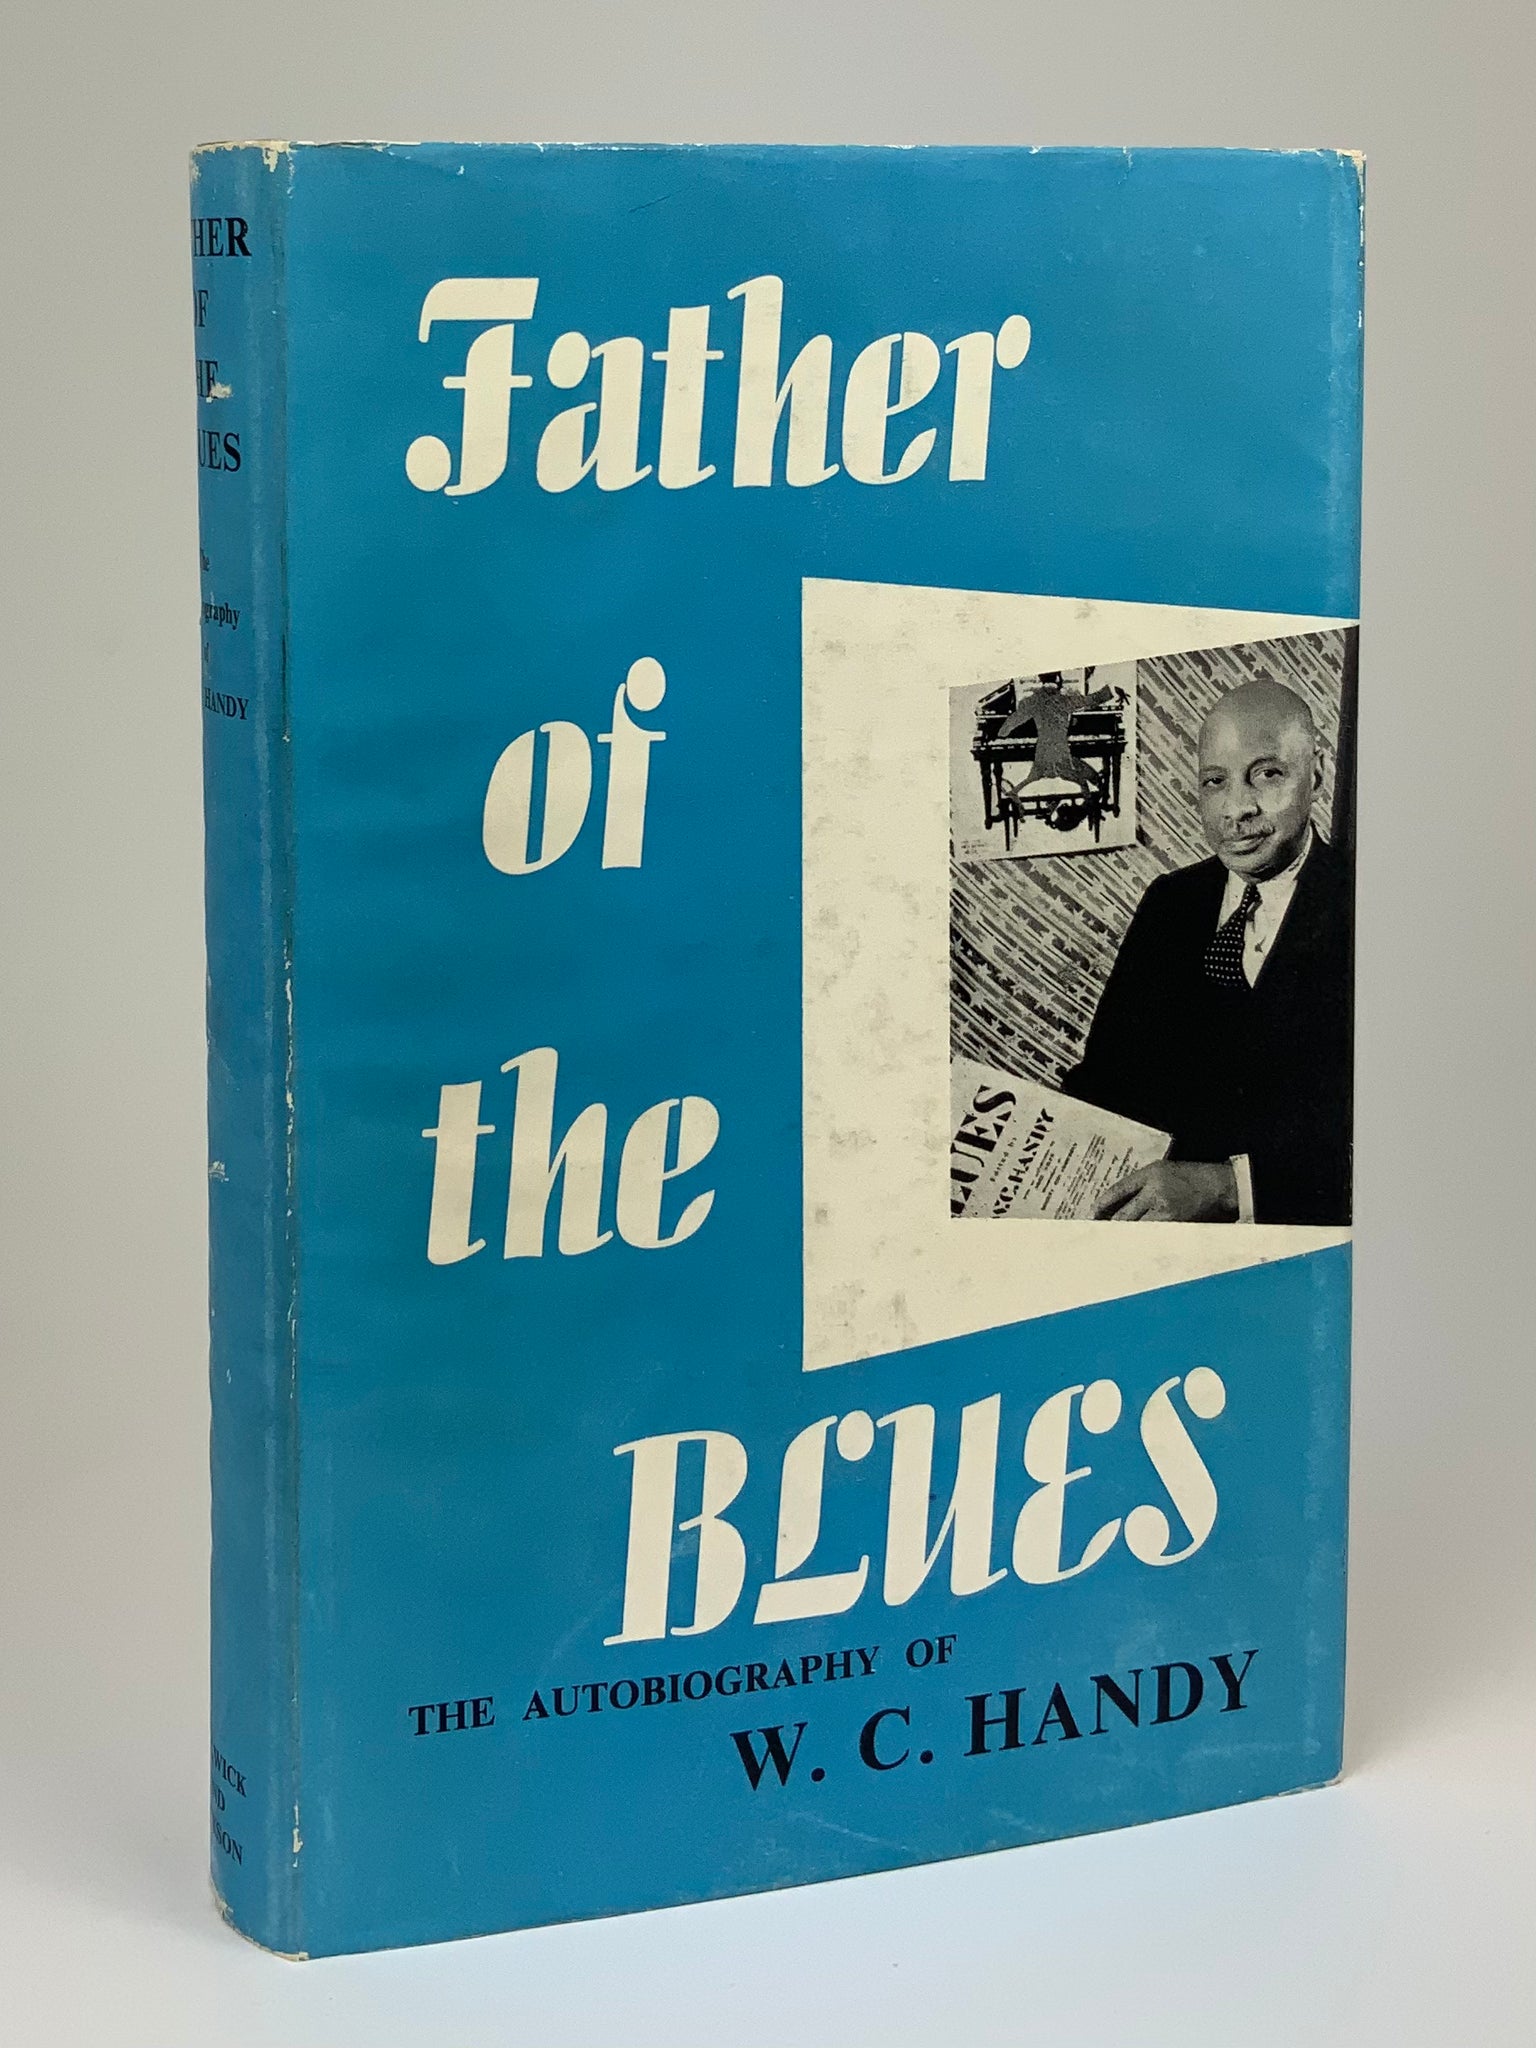 Father of the Blues - The Autobiography of W.C Handy